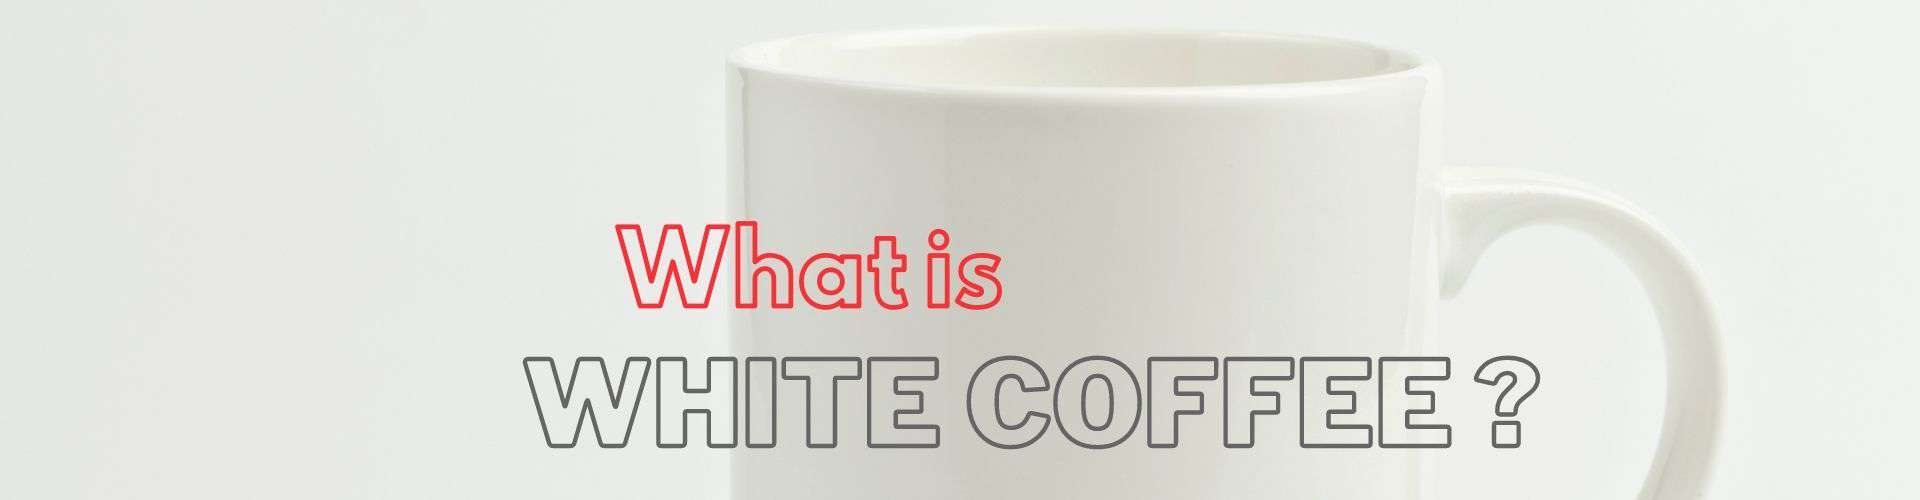 White Coffee: A Rising Coffee Trend?